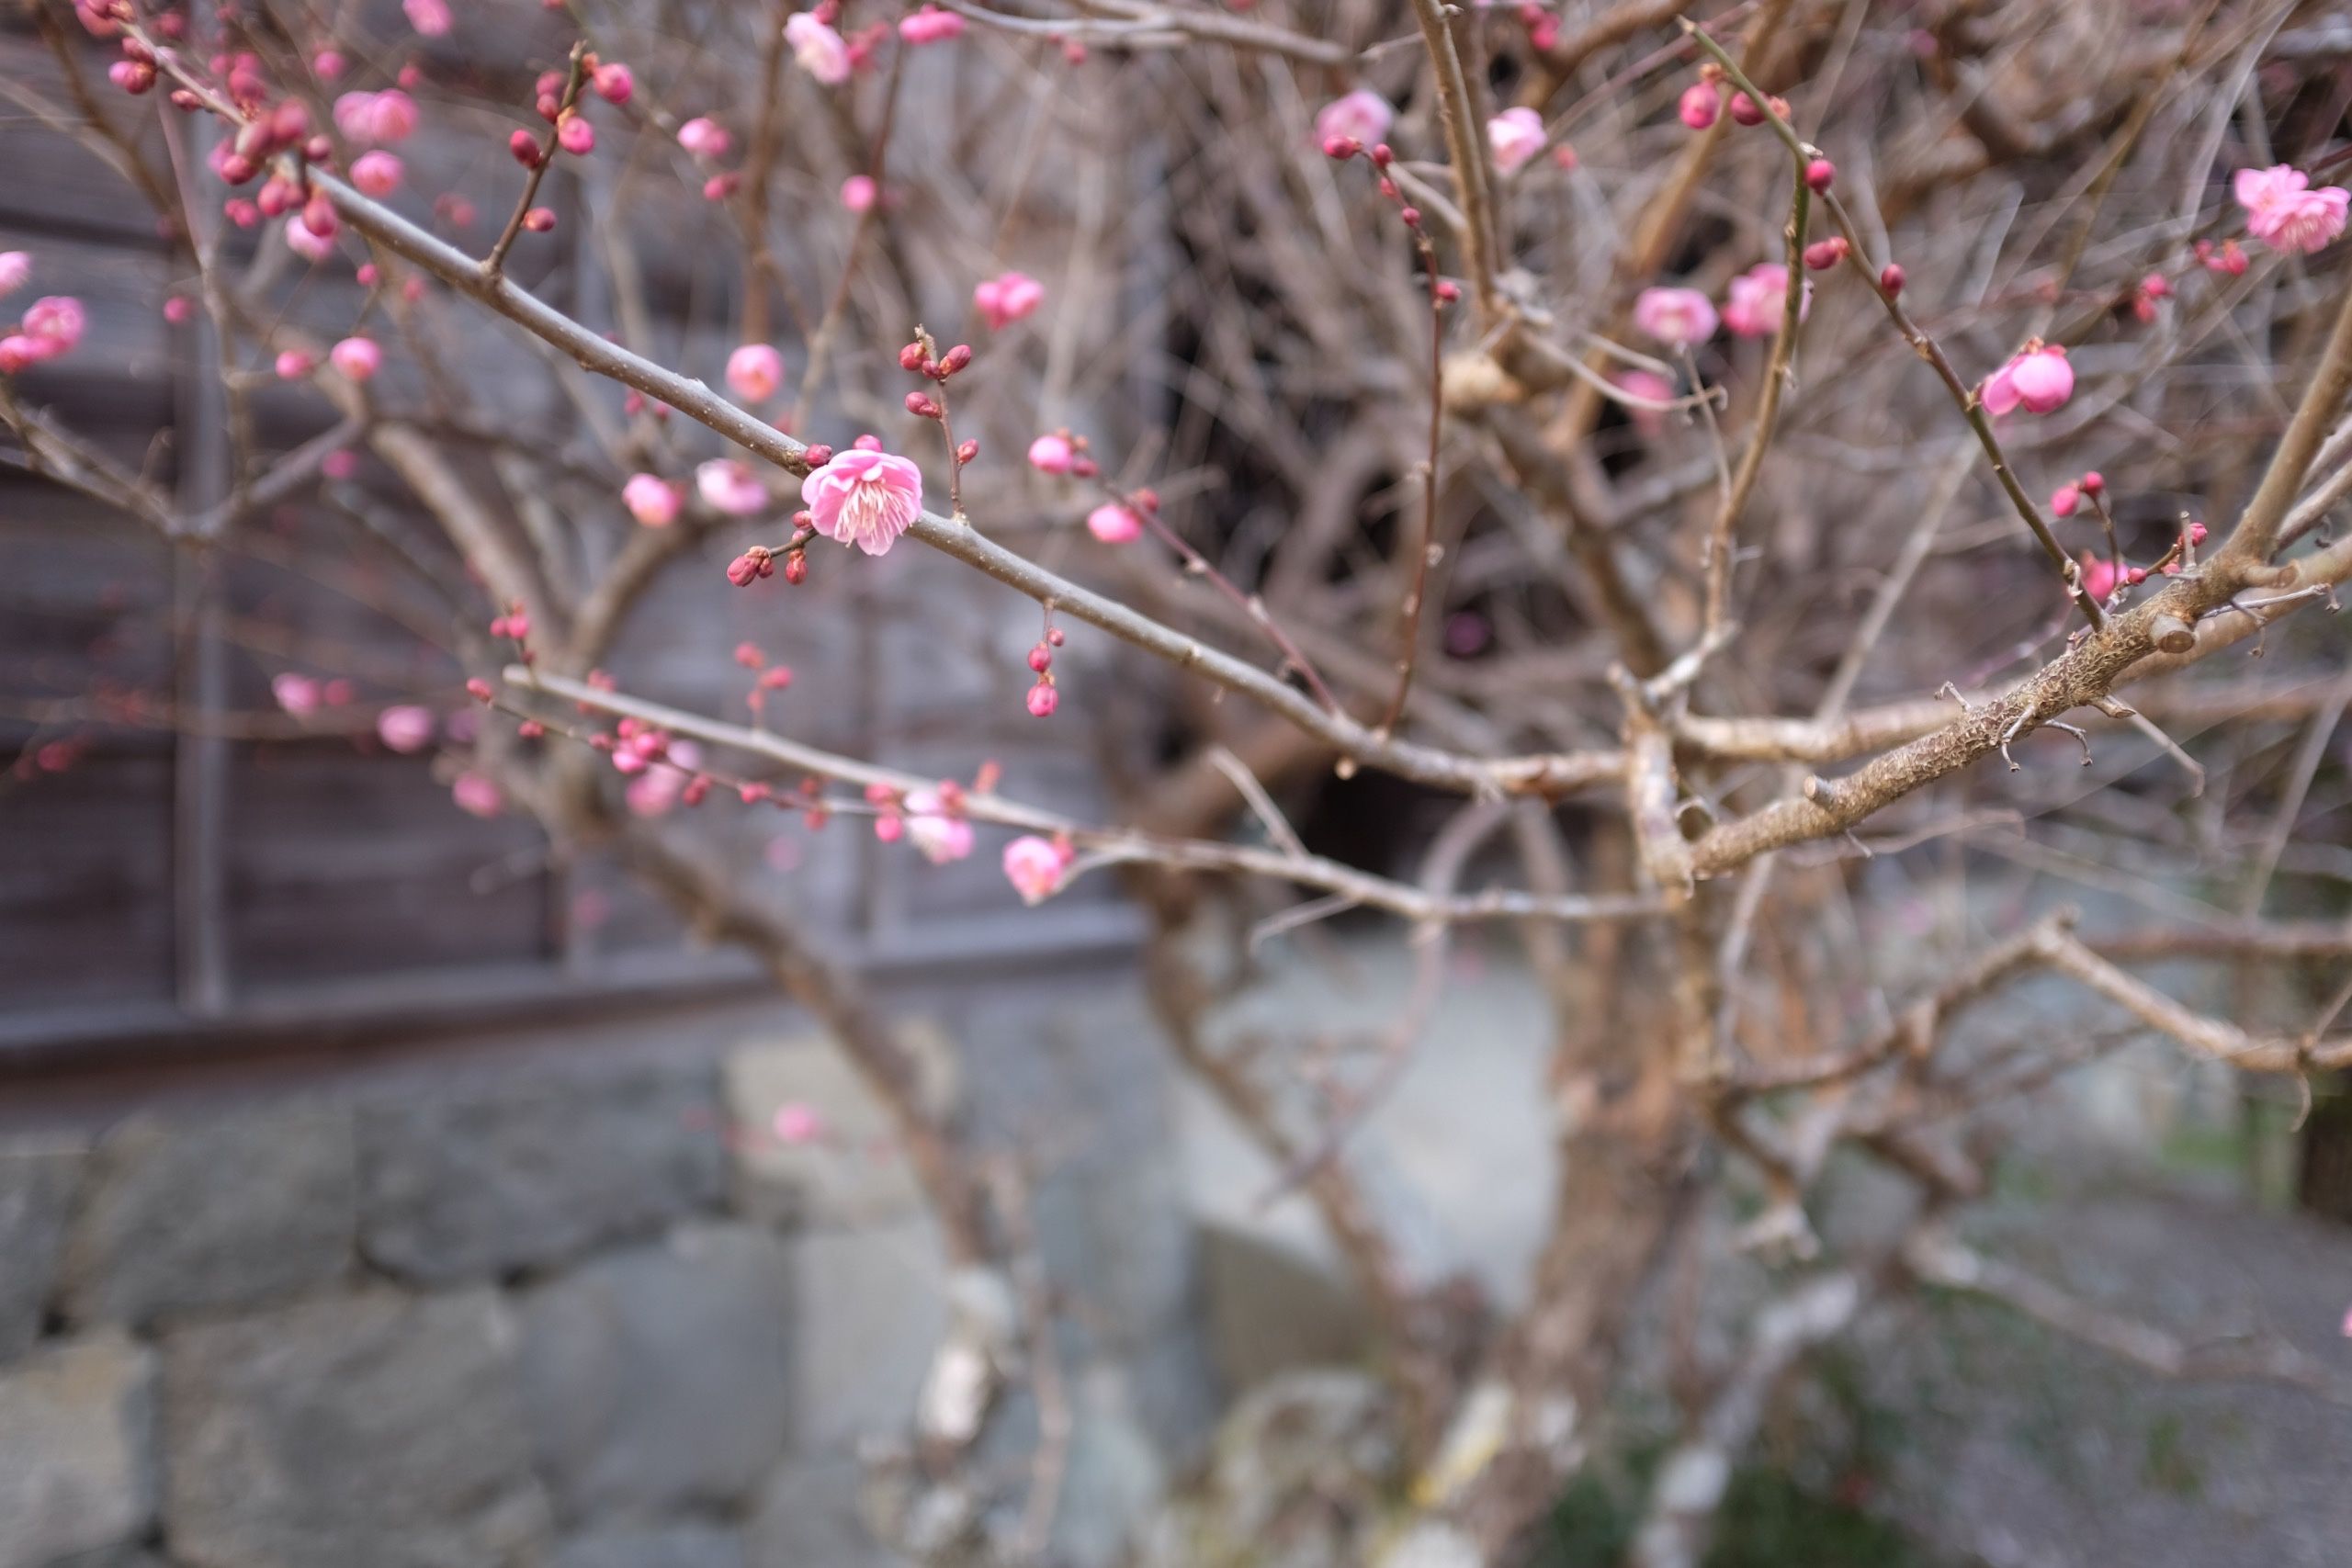 A branch of a plum tree bearing pink flowers.